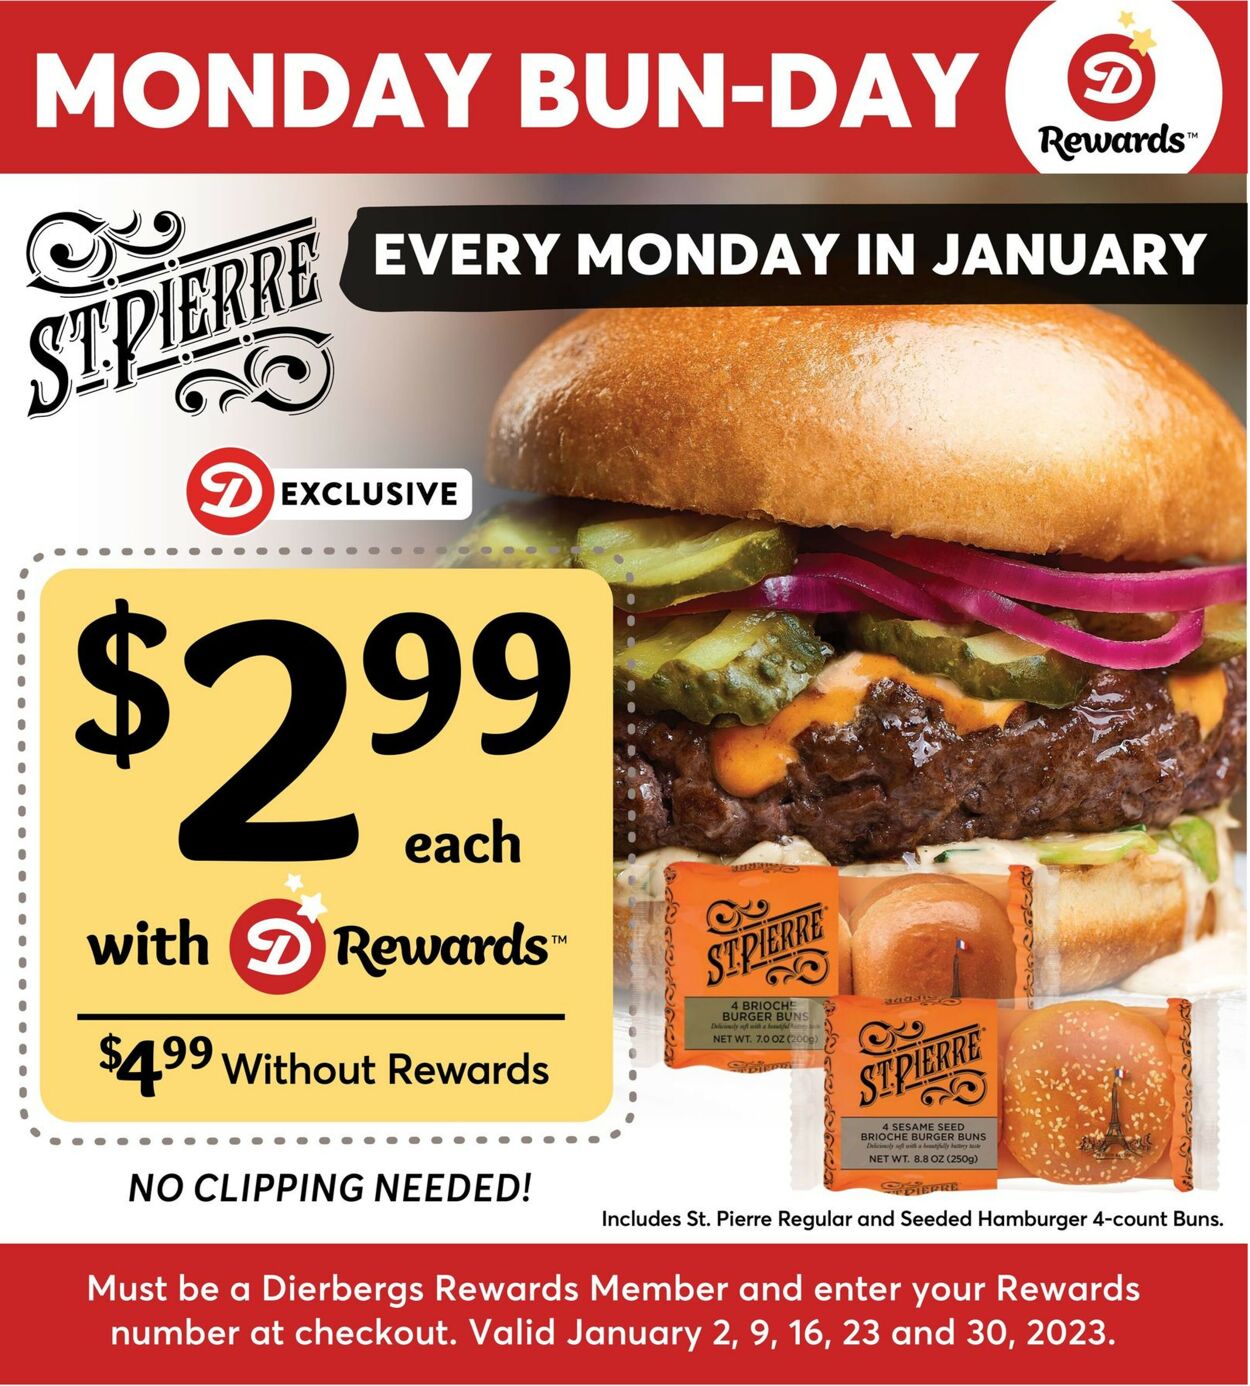 Dierbergs Ad from 01/17/2023